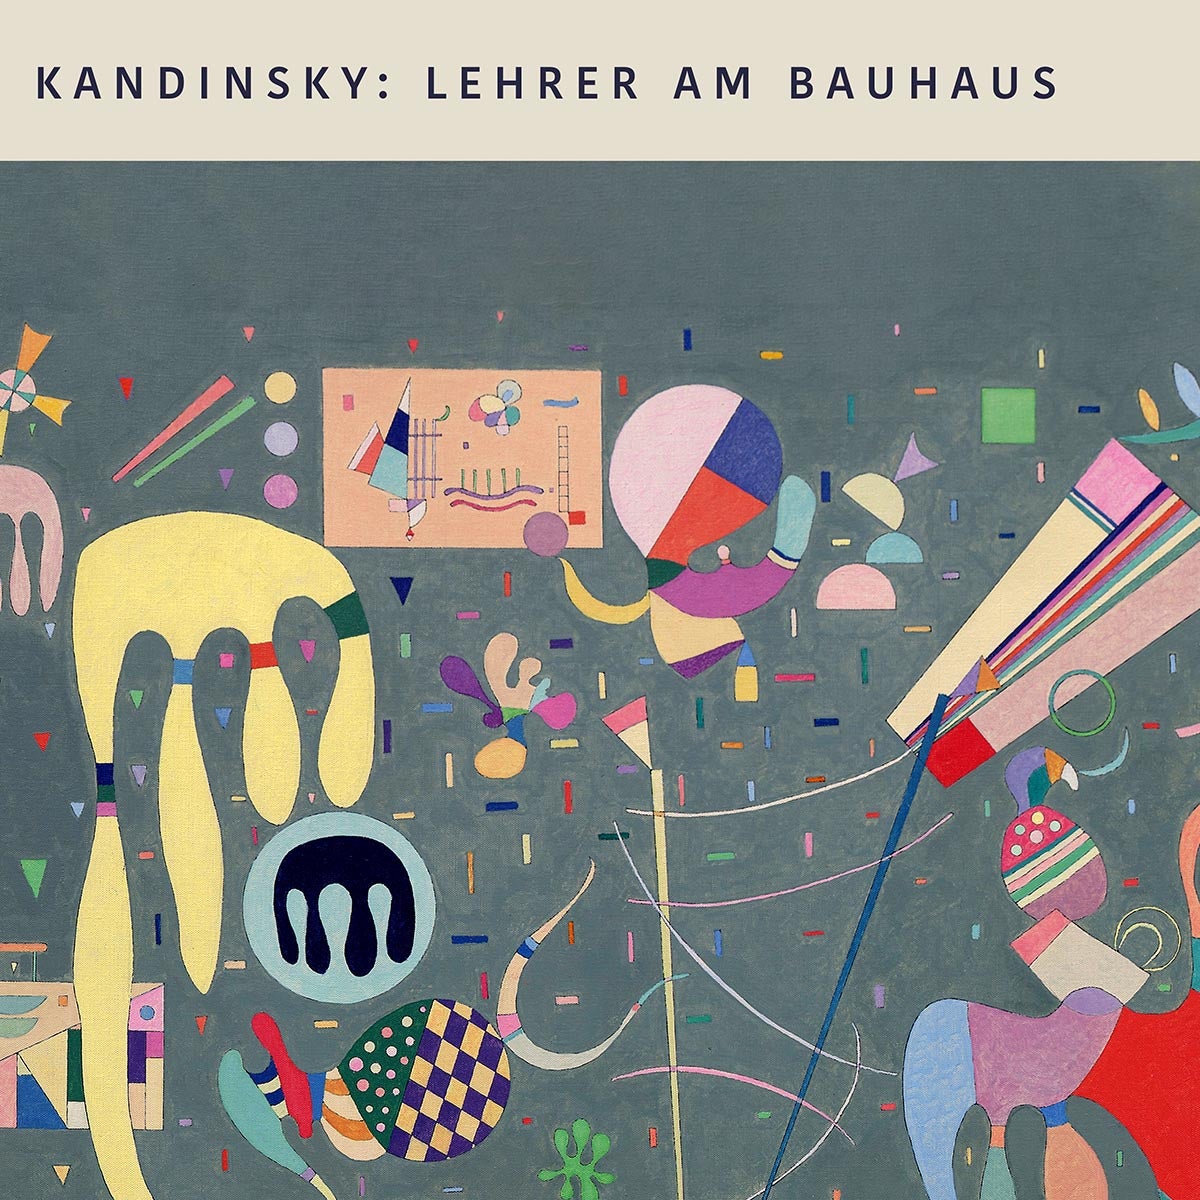 Actions Variees by Wassily Kandinsky Exhibition Poster